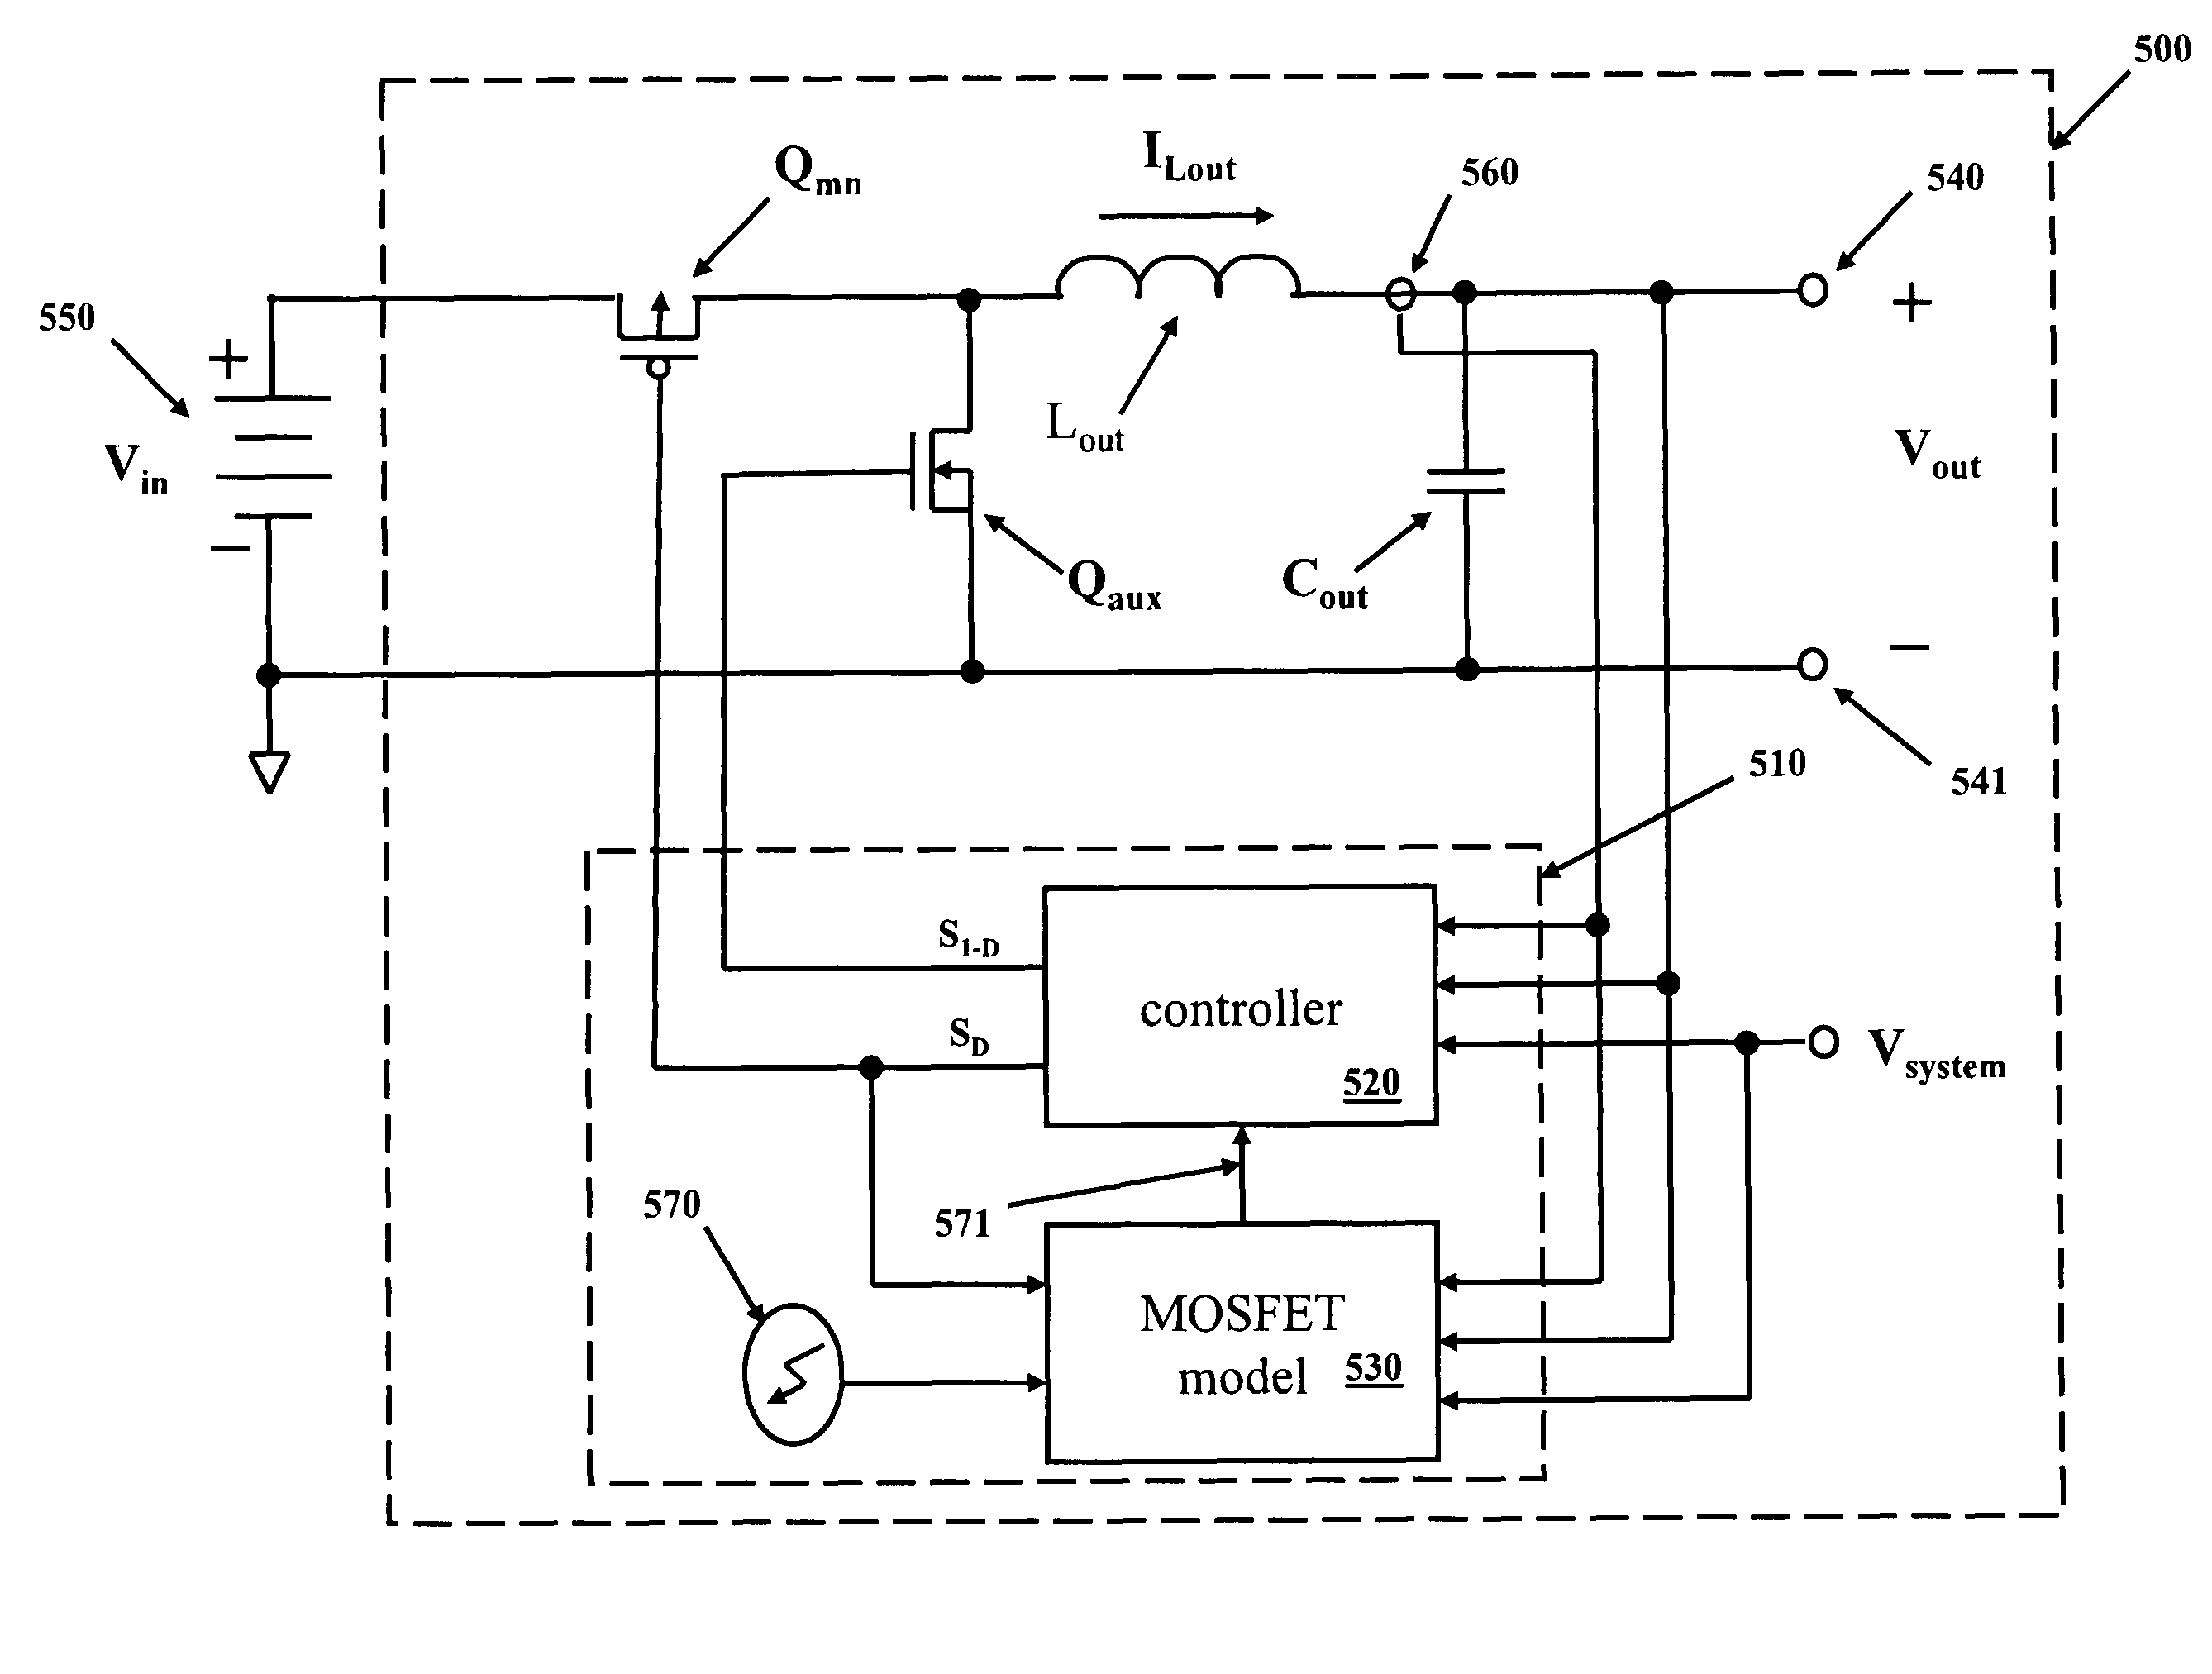 Apparatus for detecting a state of operation of a power semiconductor device